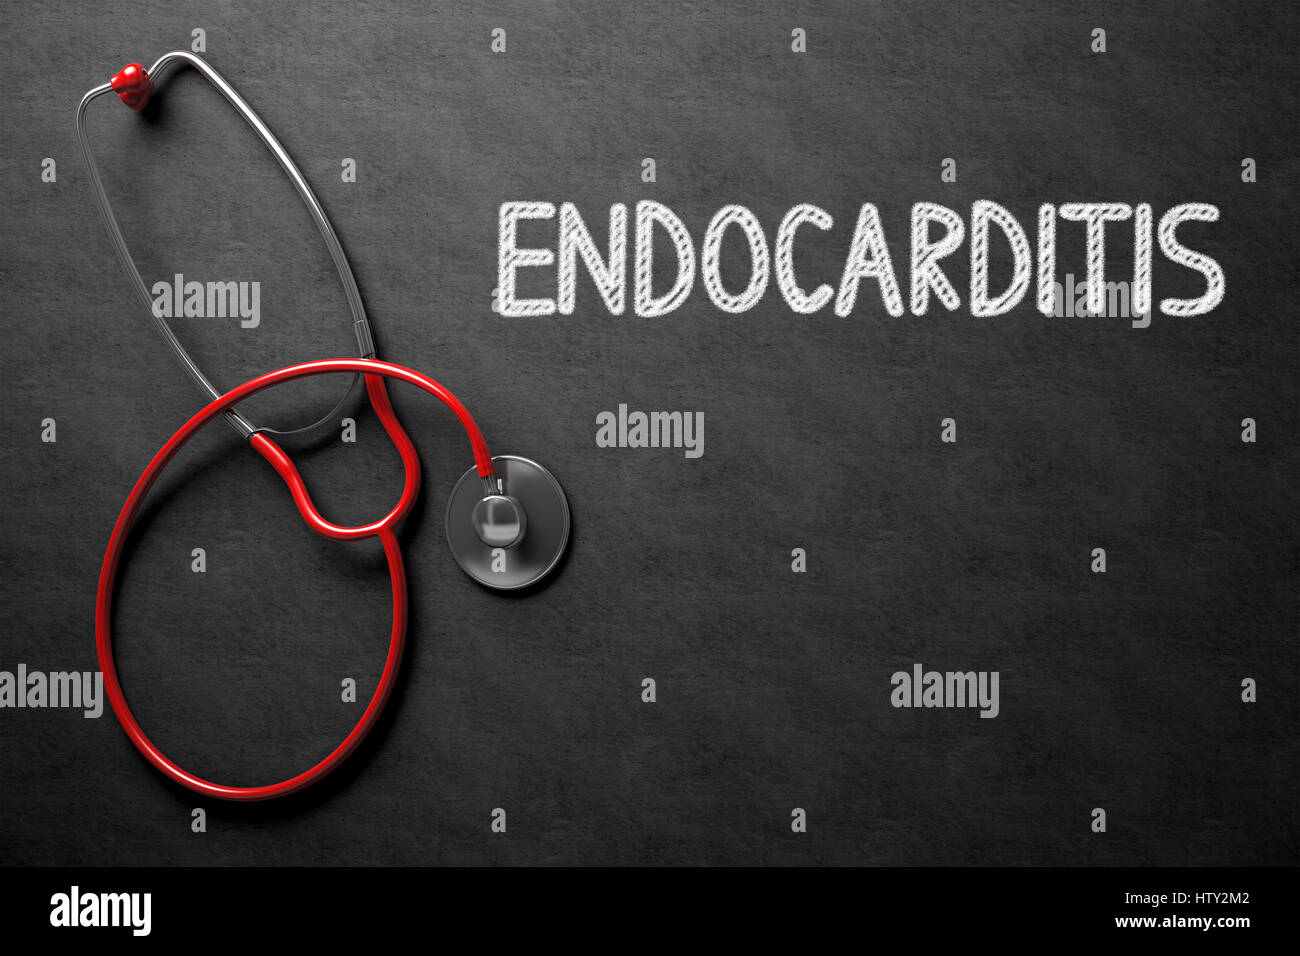 Chalkboard with Endocarditis. 3D Illustration. Stock Photo